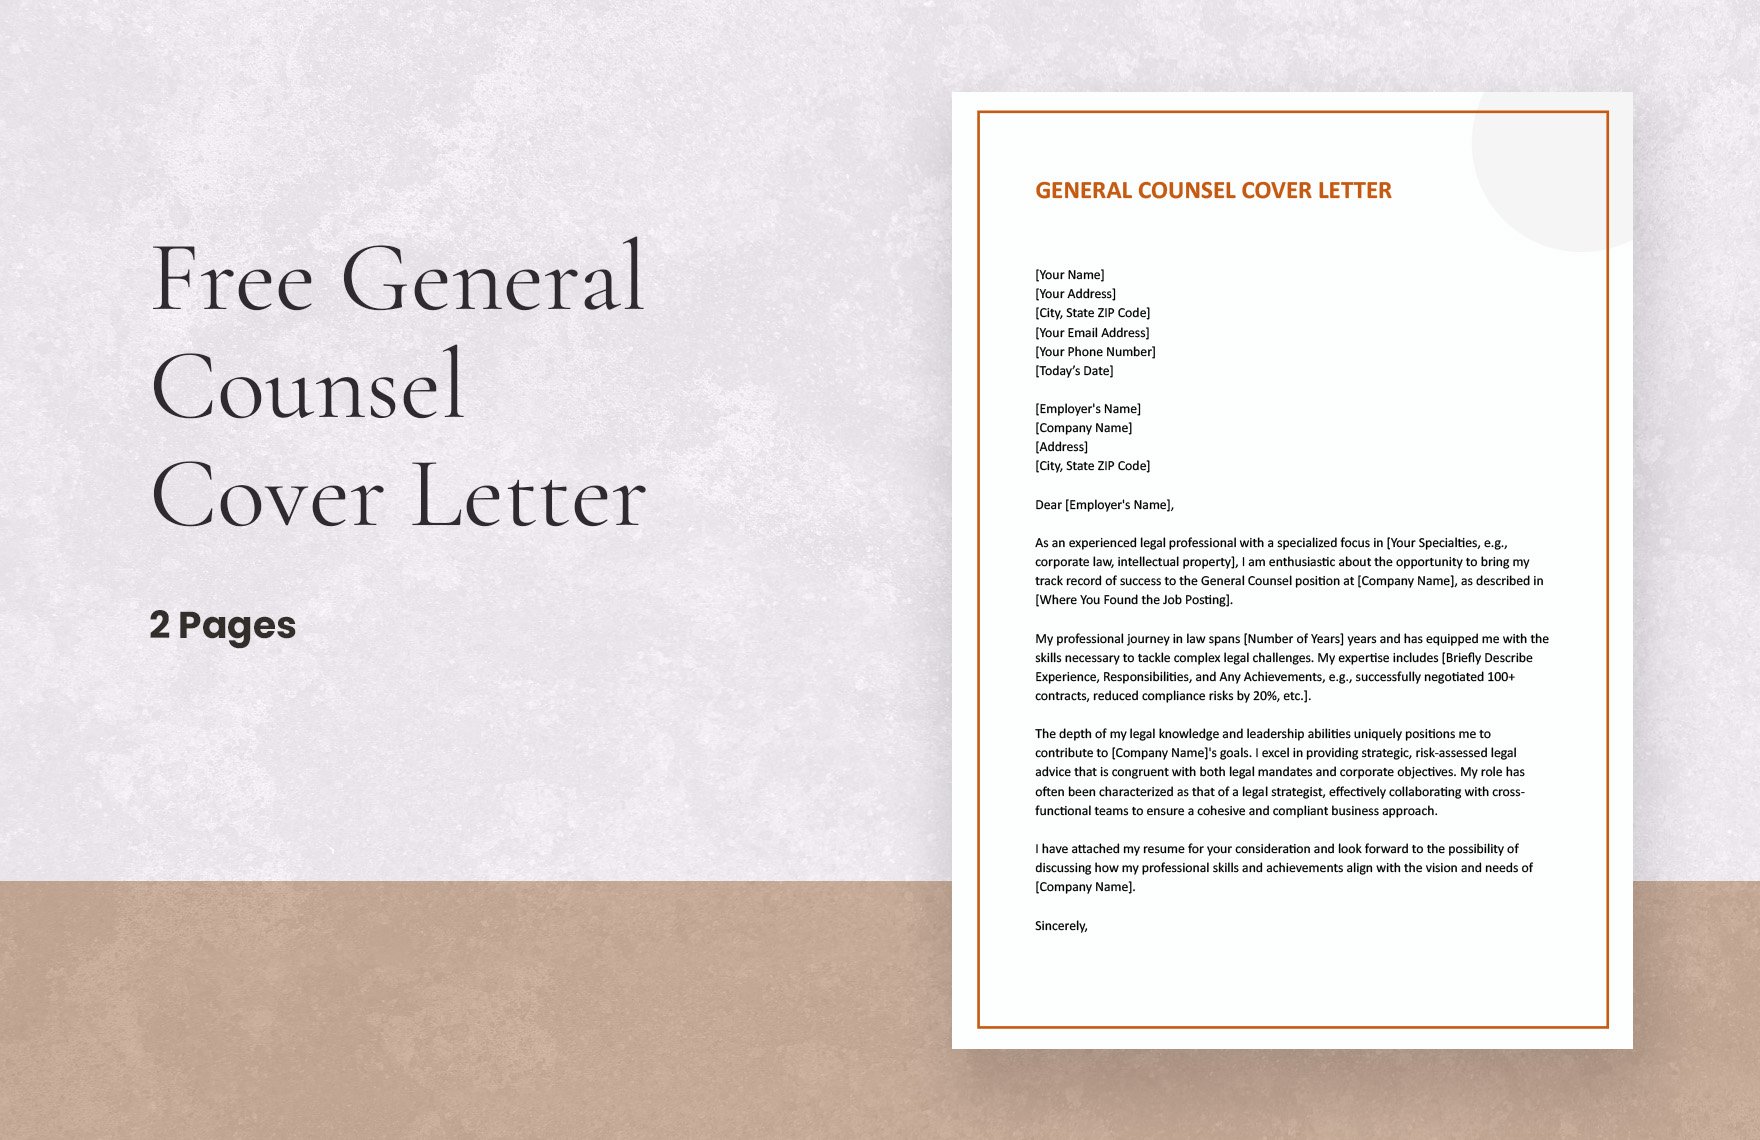 General Counsel Cover Letter